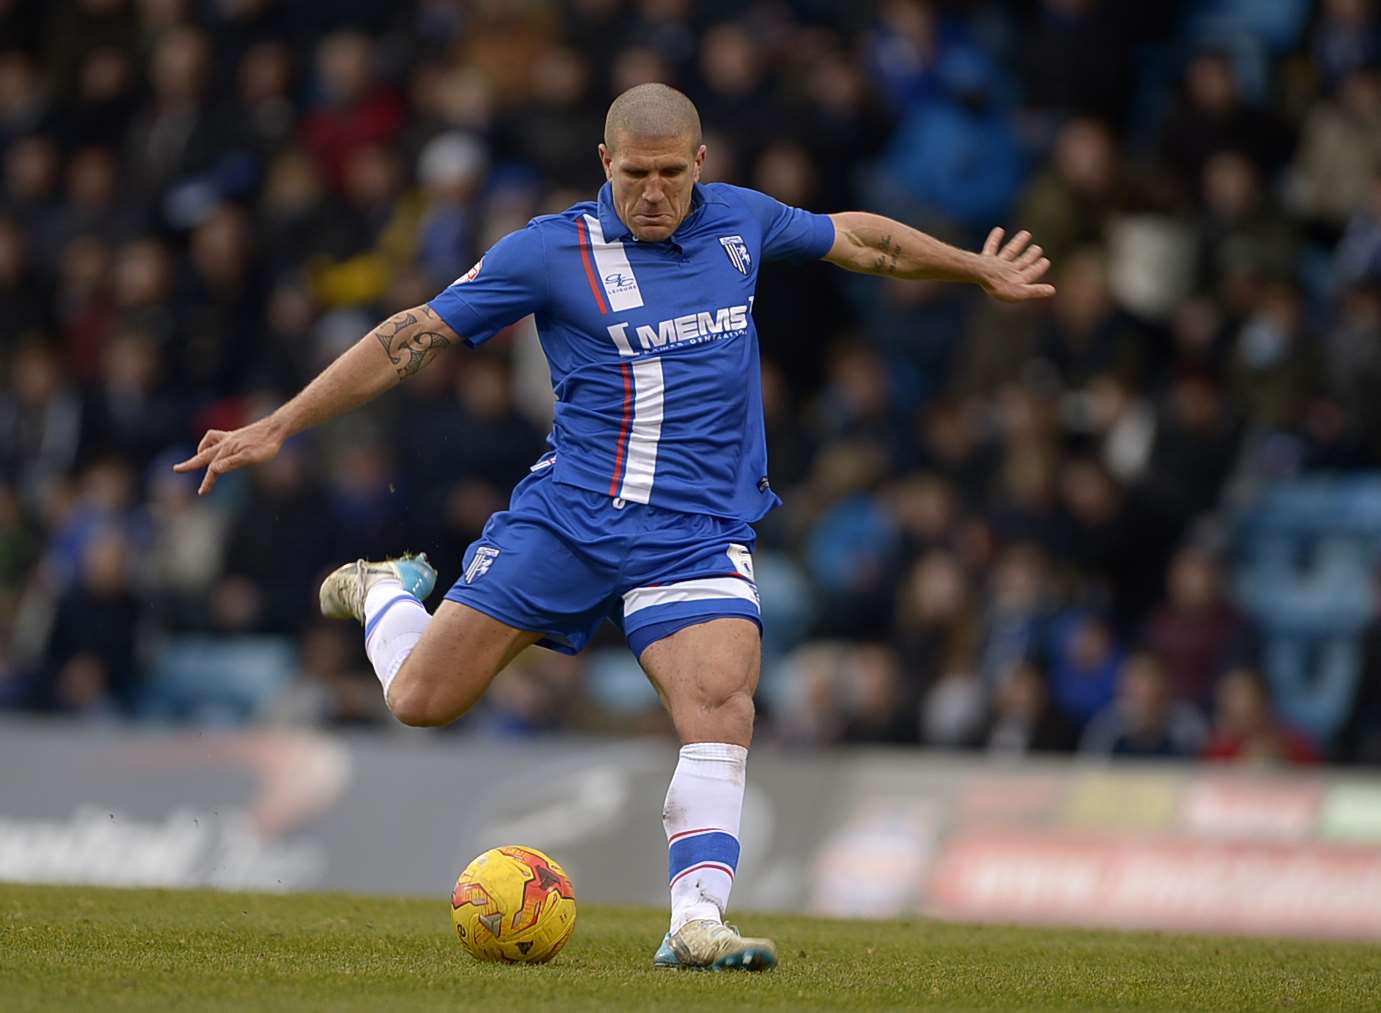 Former Gills defender Adam El-Abd is one of the departures from Shrewsbury, dropping to League 2 Wycombe.